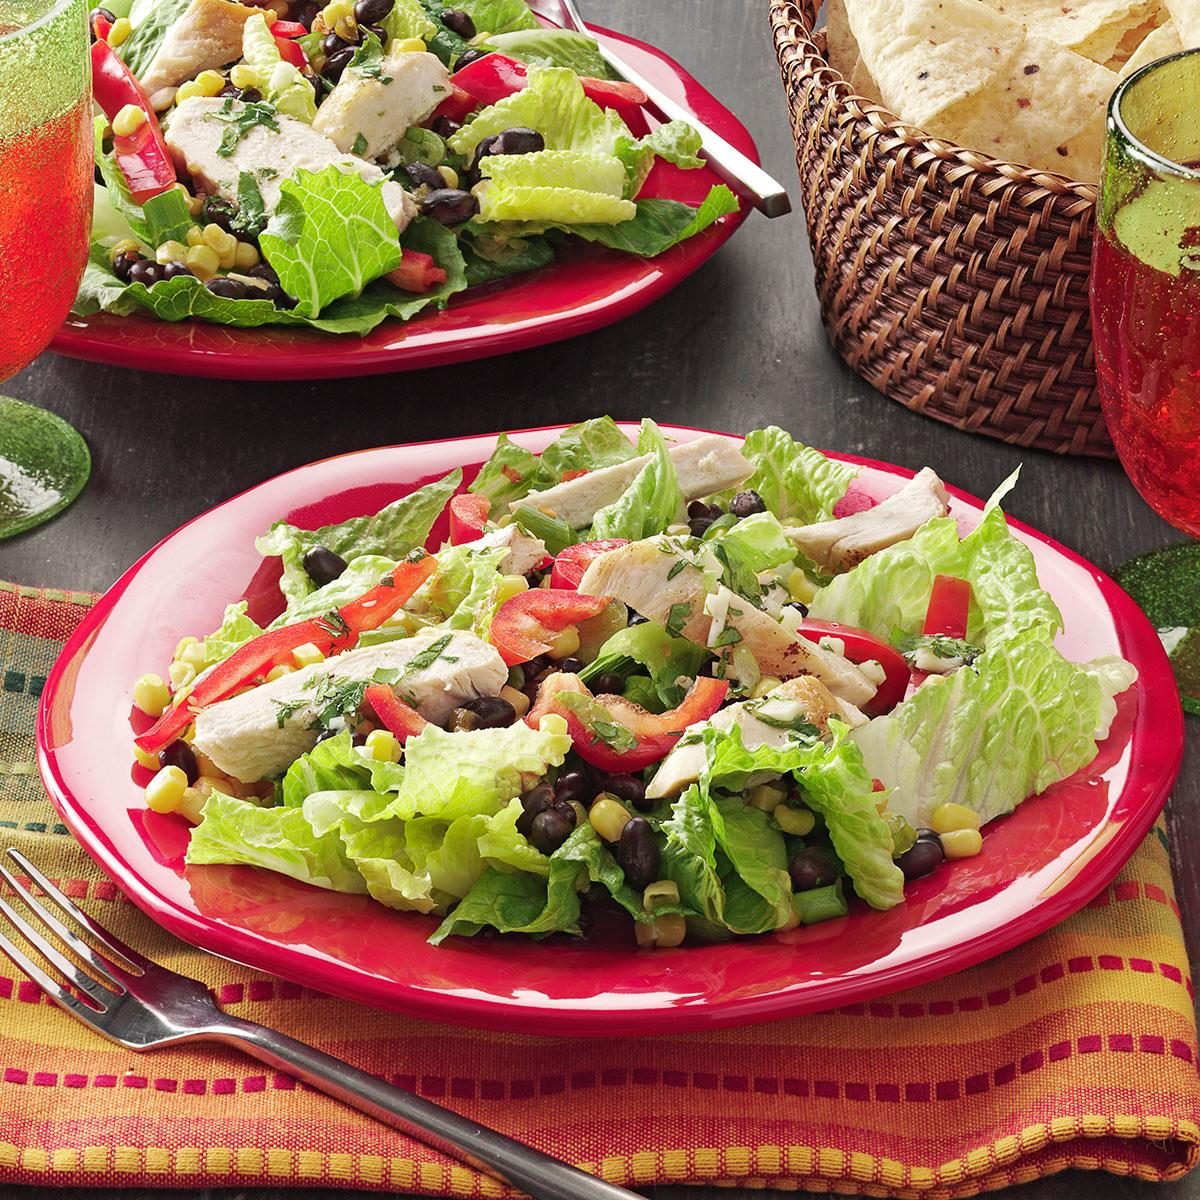 Inspired by McDonald's Southwest Grilled Salad